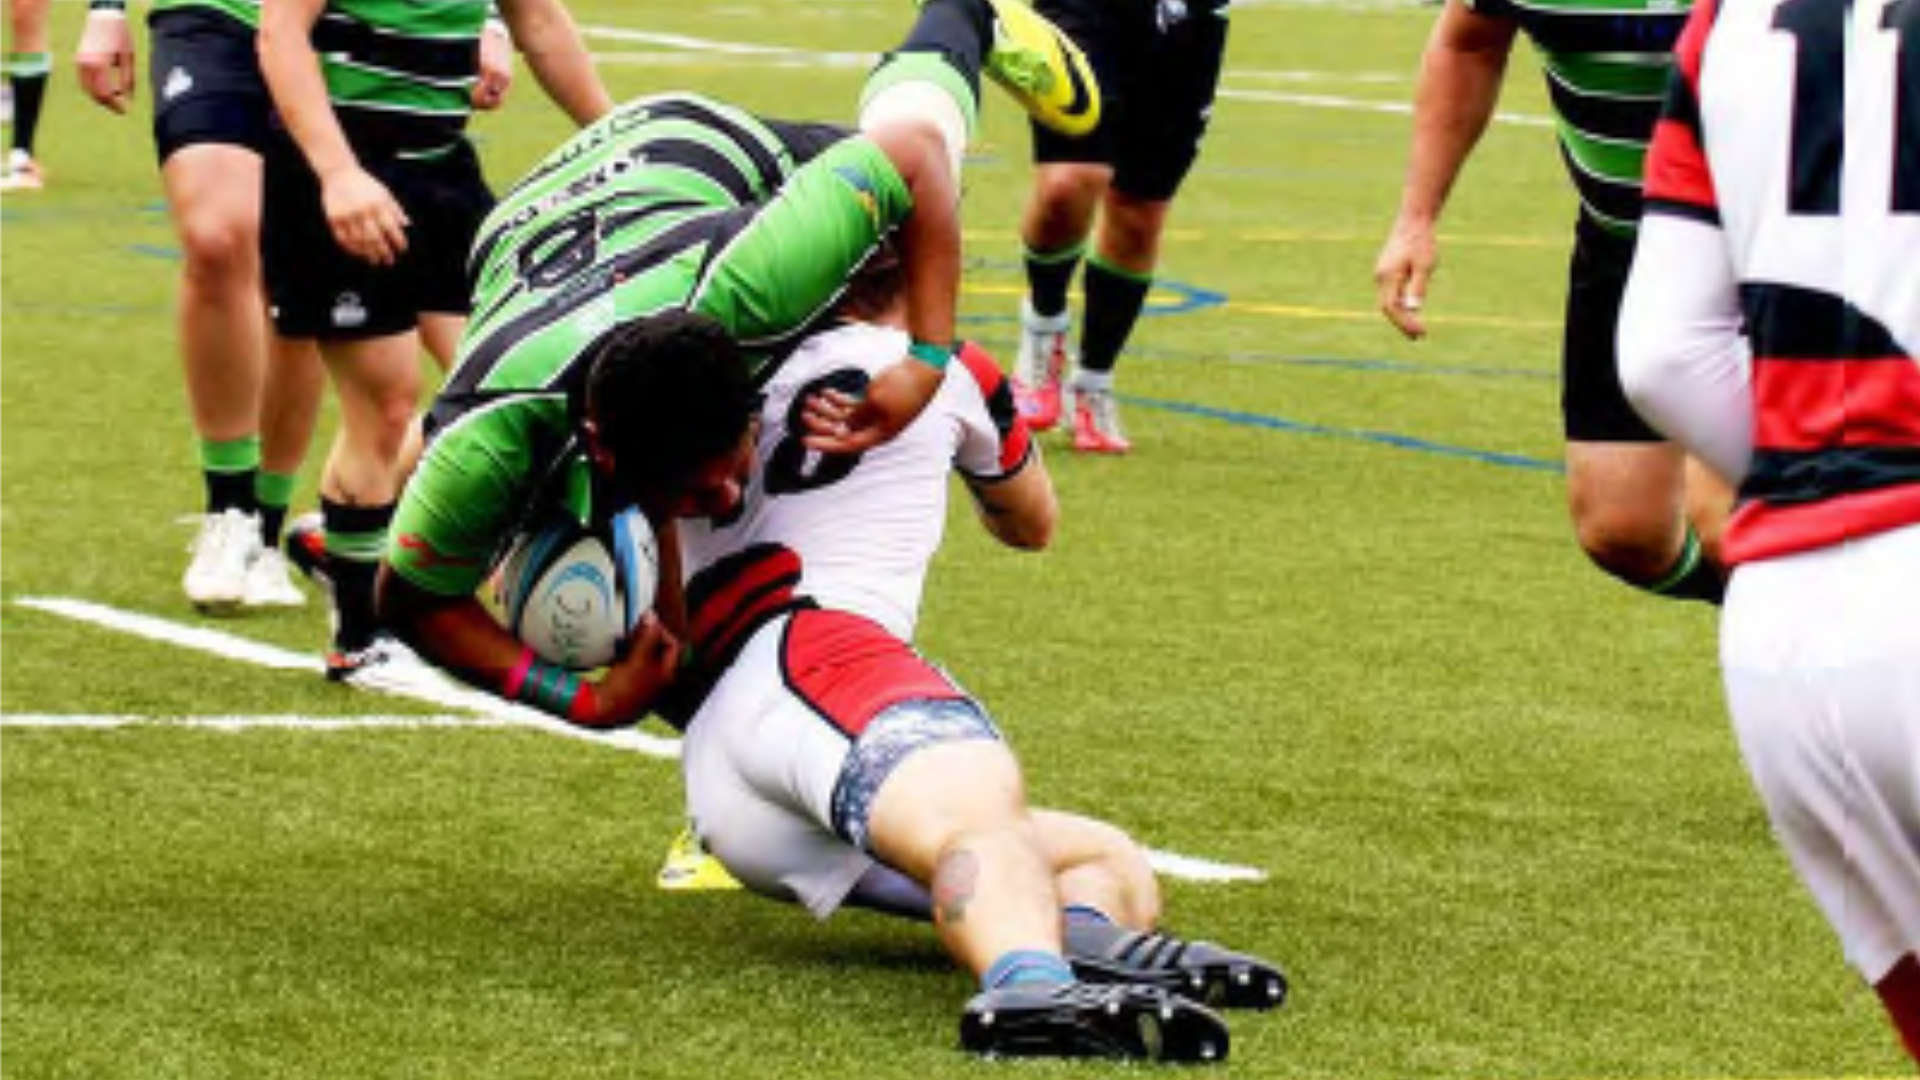 Rugby players tackling - Woodlands rugby